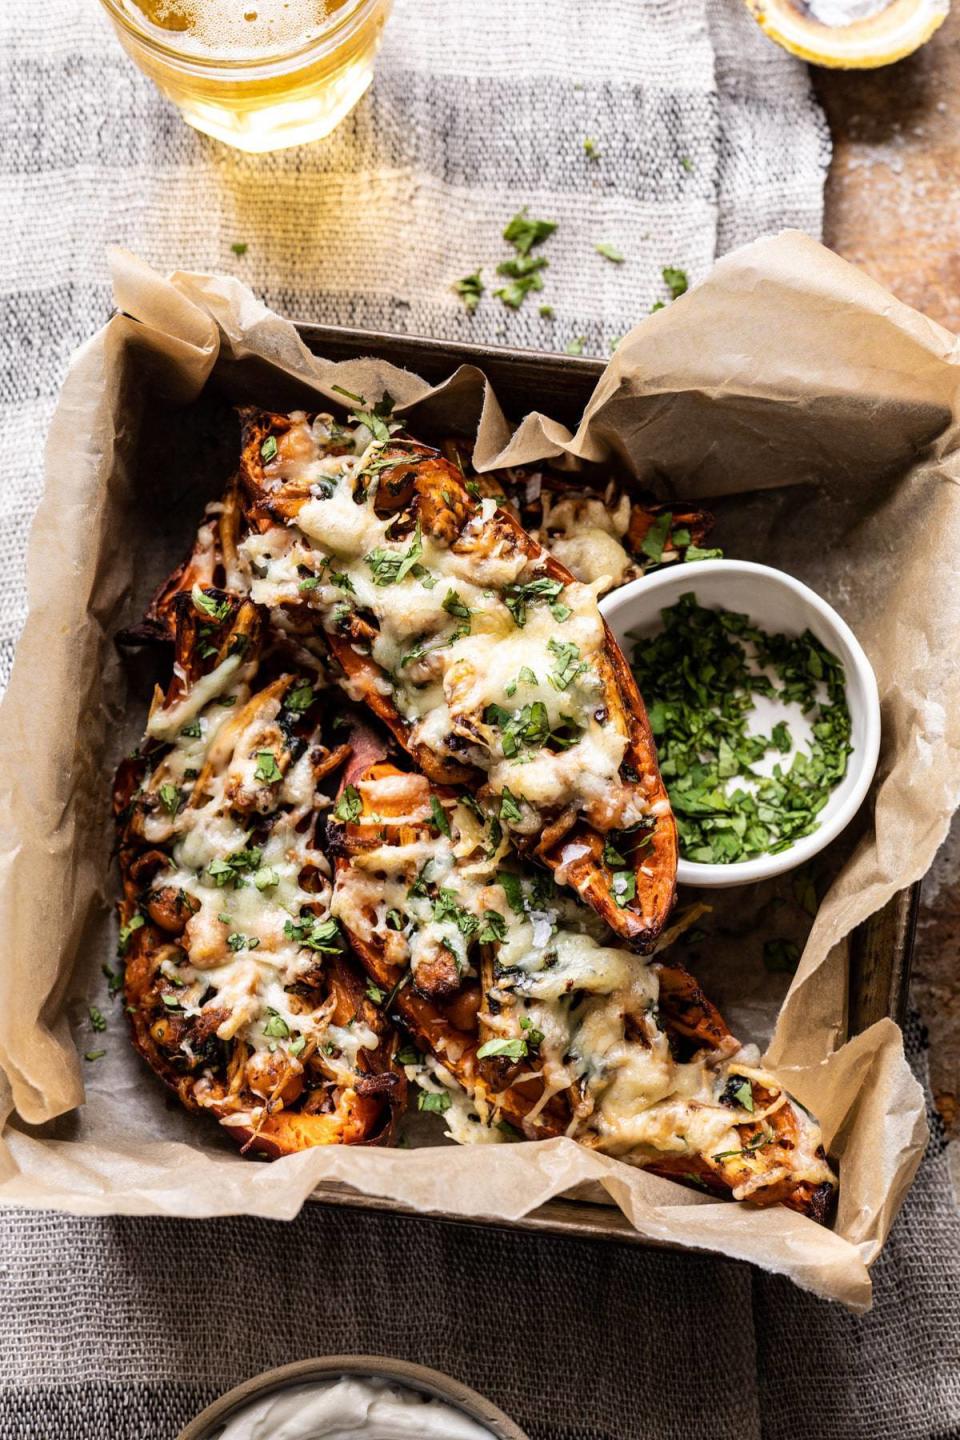 <a href="https://www.halfbakedharvest.com/healthy-chipotle-chicken-sweet-potato-skins/" target="_blank" rel="noopener noreferrer"><strong>Healthy Chipotle Chicken Sweet Potato Skins from Half Baked Harvest</strong></a>